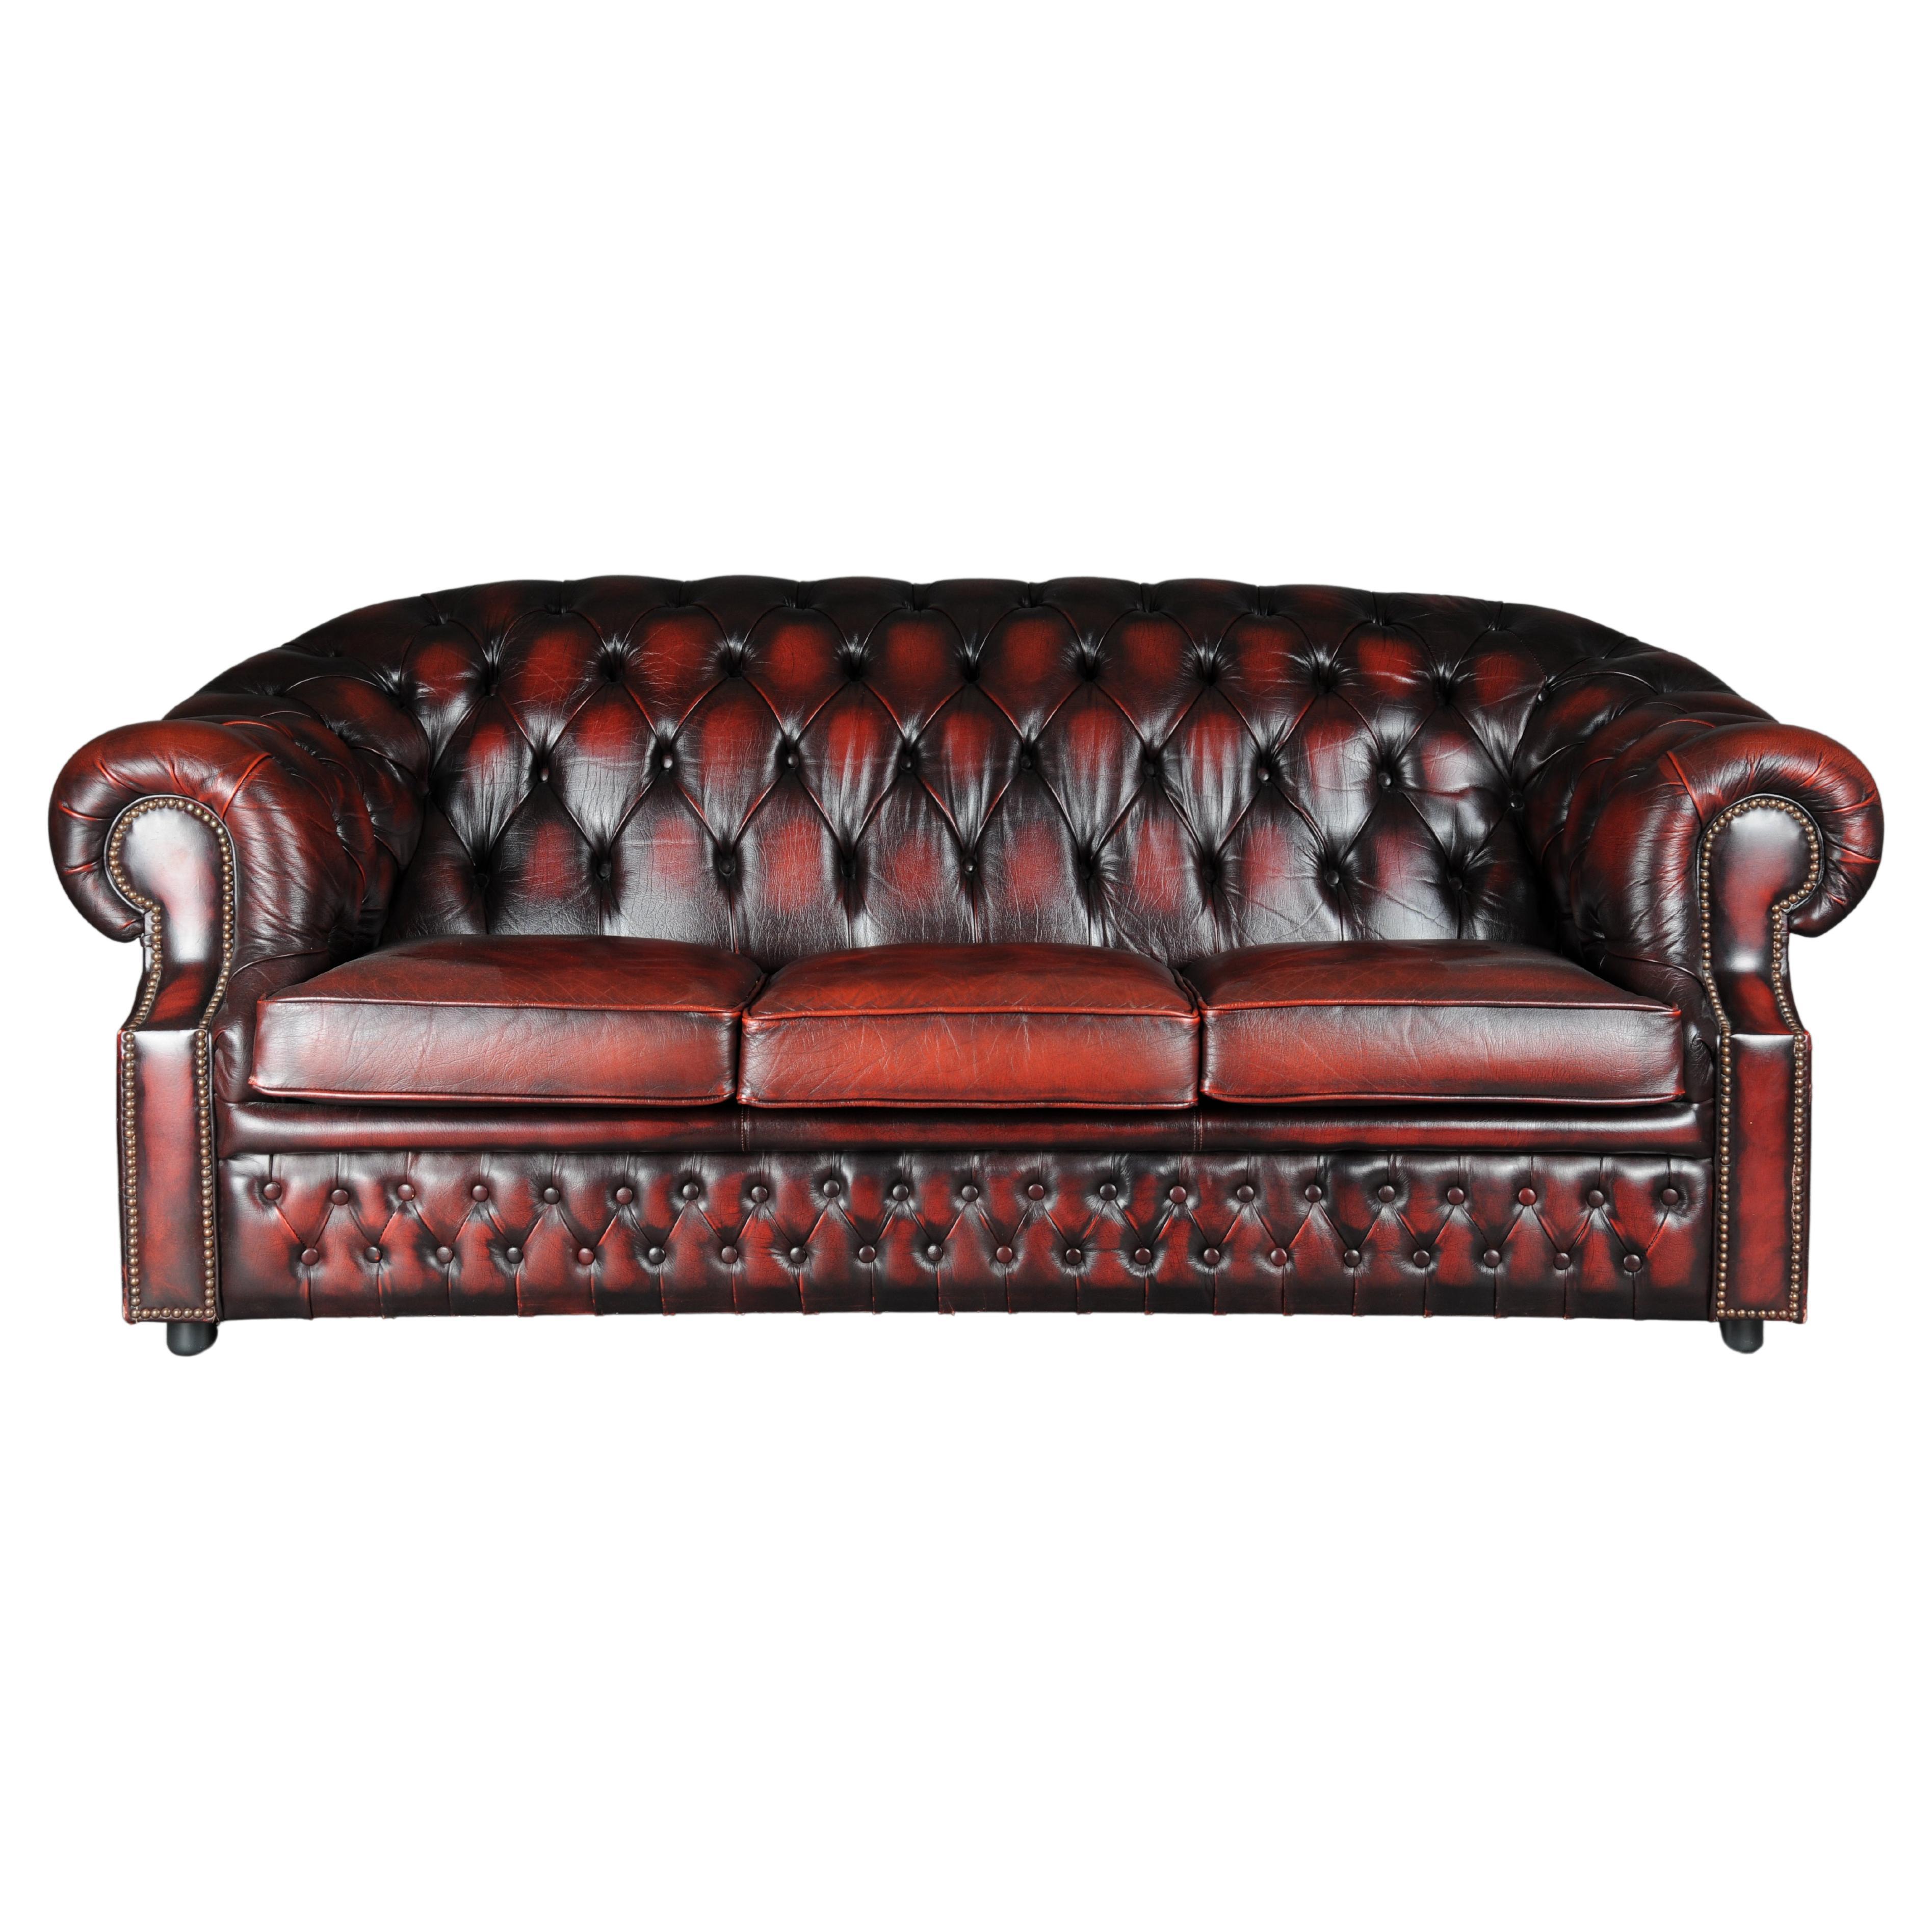 Exclusive 3 Seater Chesterfield Couch/Sofa Bordeaux Red, England